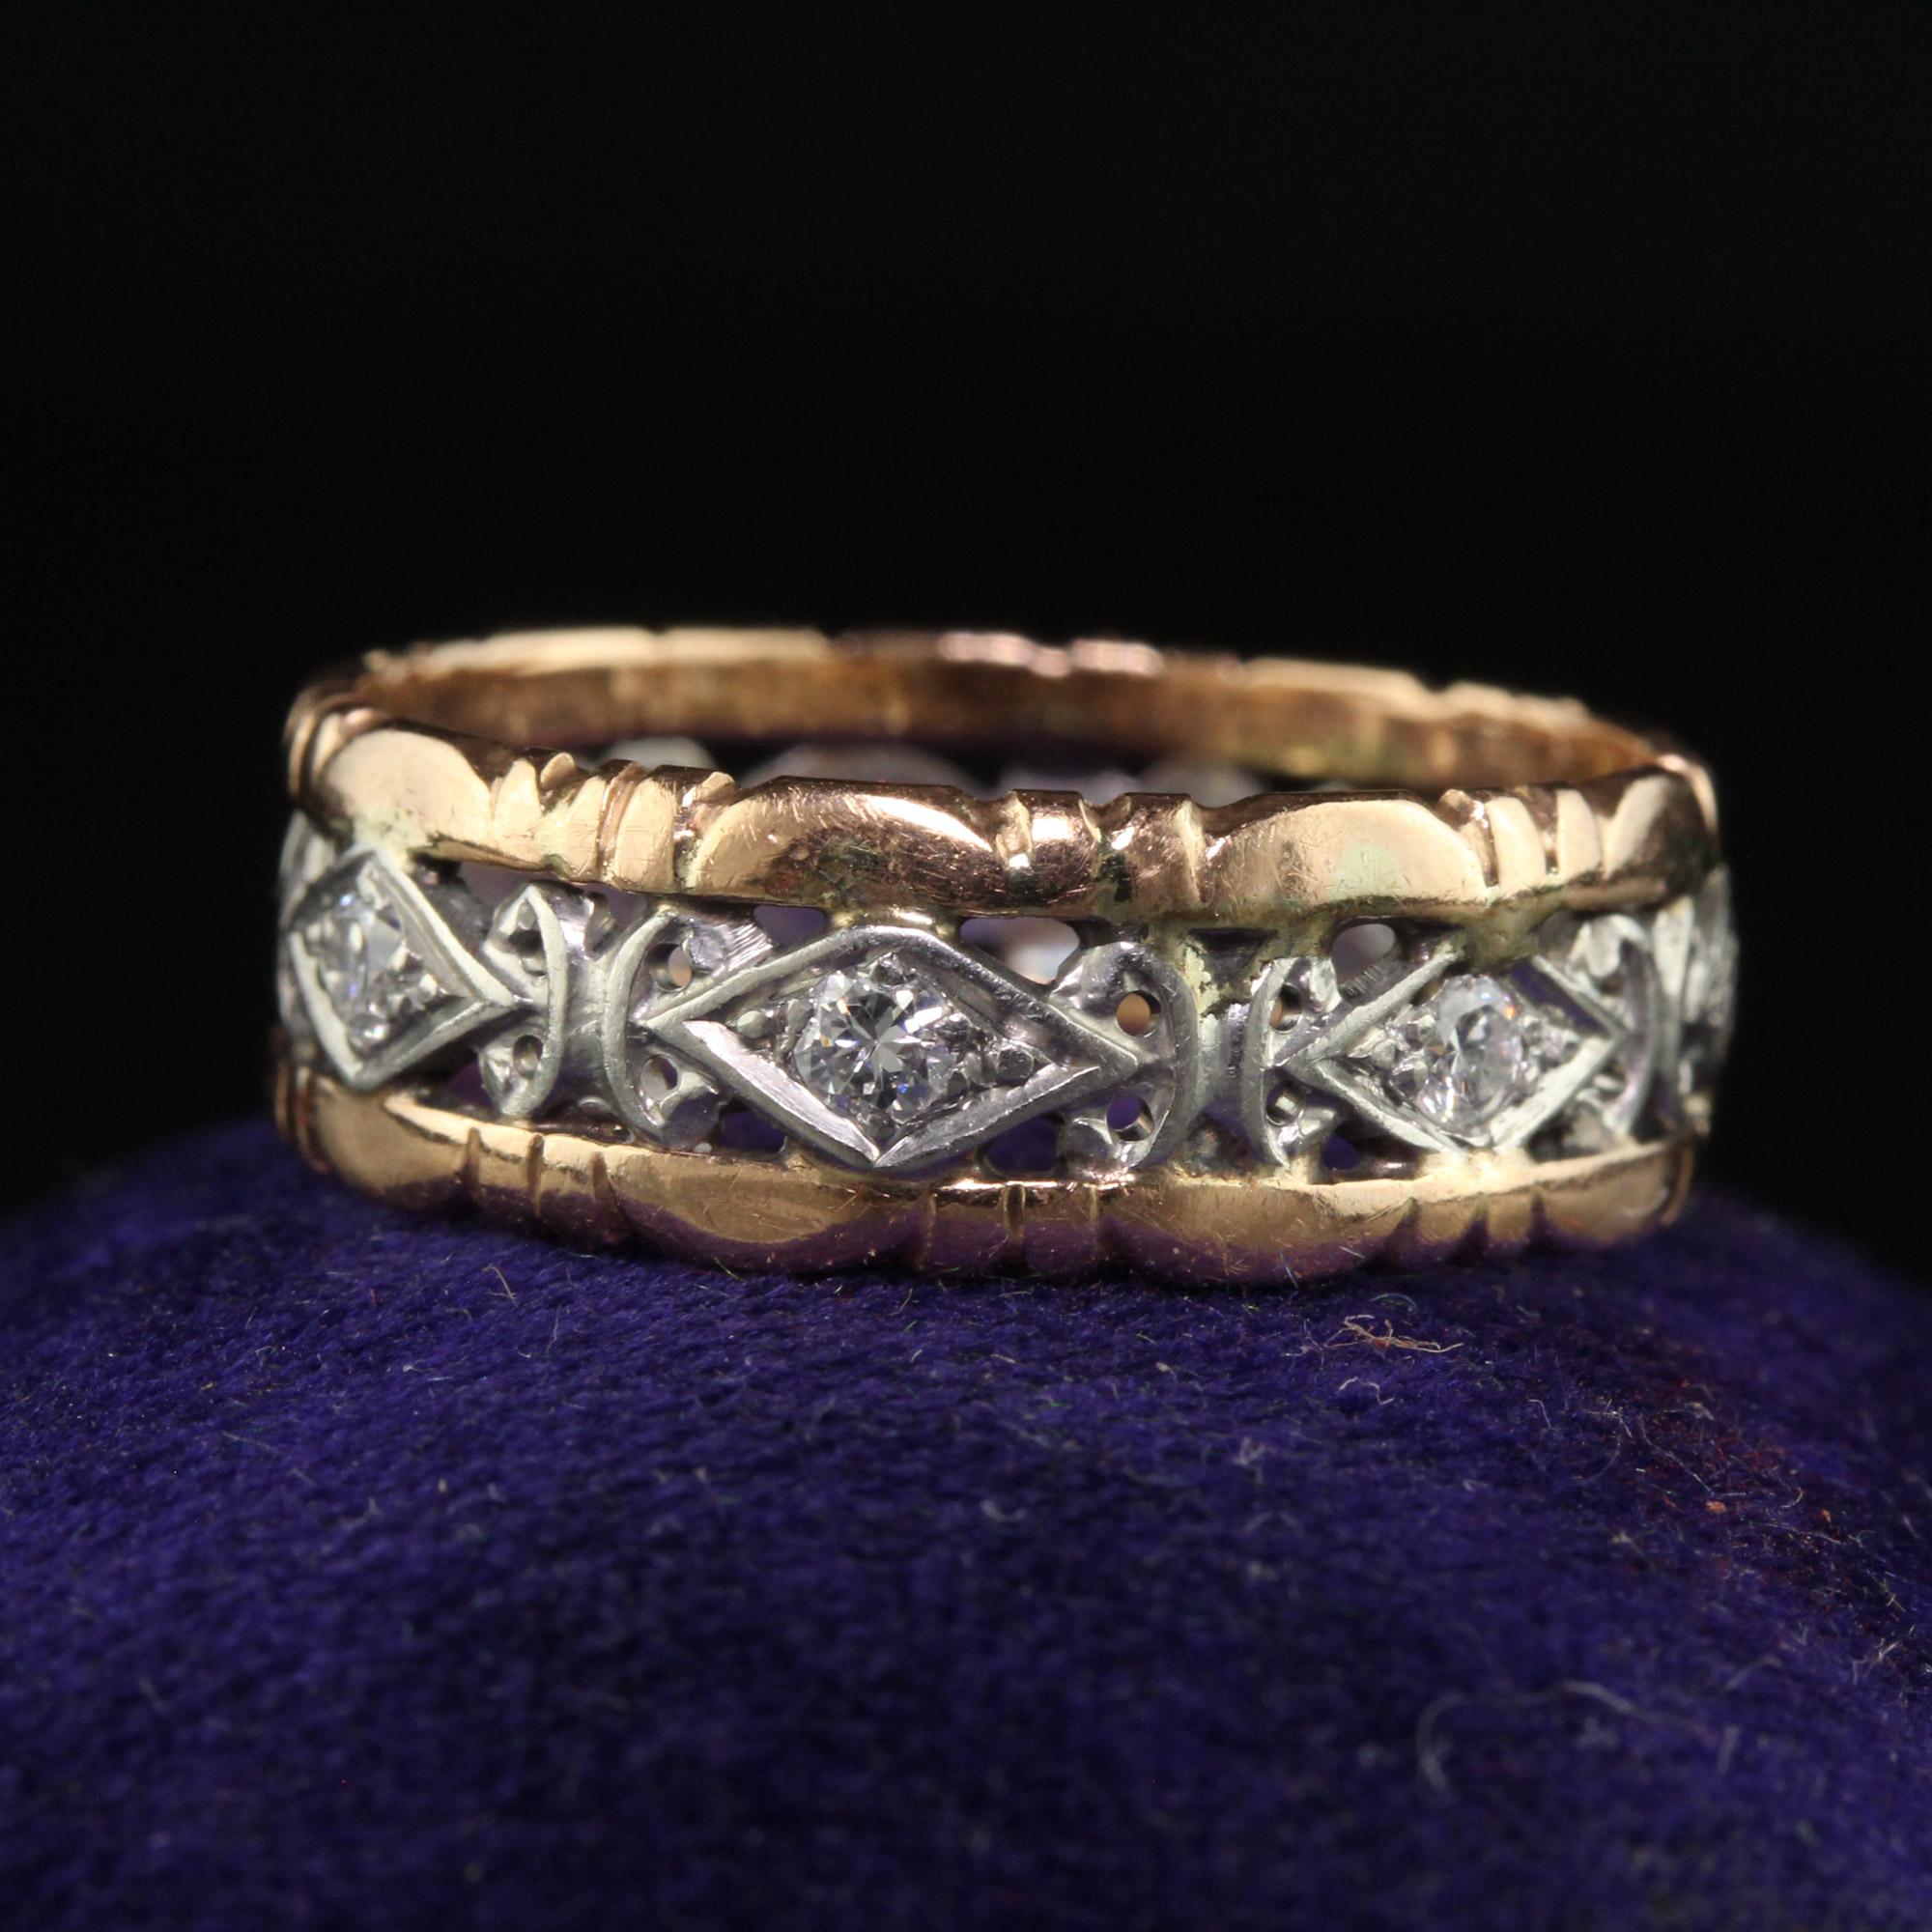 Beautiful Antique Art Deco 14K Gold Platinum Old Cut Diamond Floral Wide Wedding Band - Size 6. This beautiful wedding band is crafted in 14k yellow and platinum. The band has old cut diamonds in each station of the platinum center around the entire